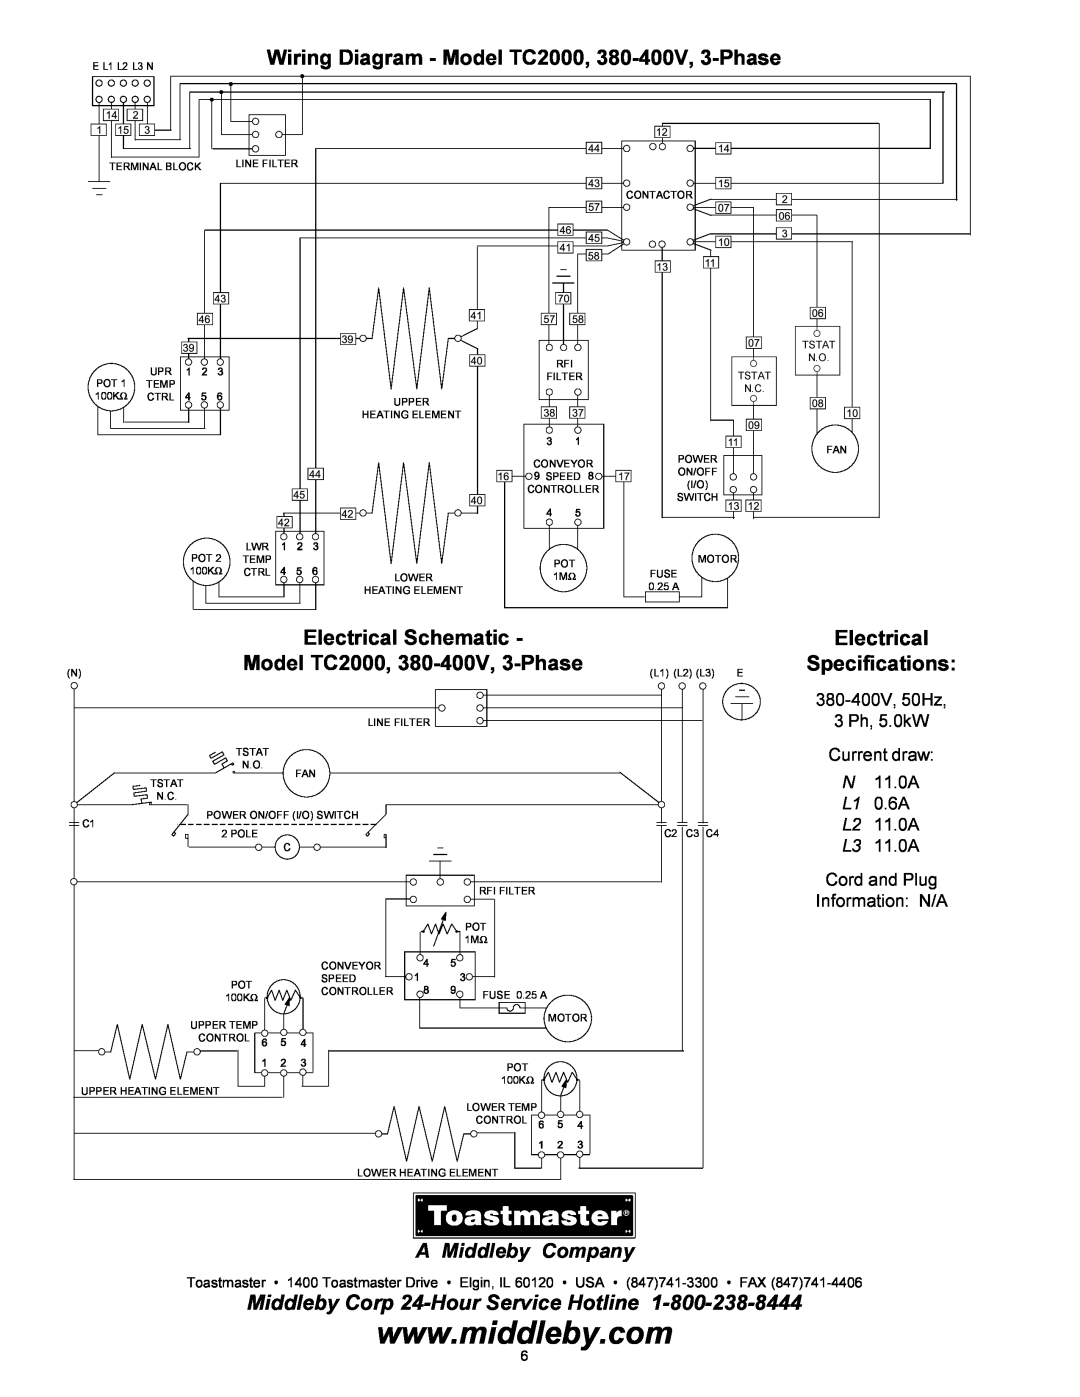 Toastmaster Wiring Diagram - Model TC2000, 380-400V, 3-Phase, Electrical Schematic, Specifications, A Middleby Company 